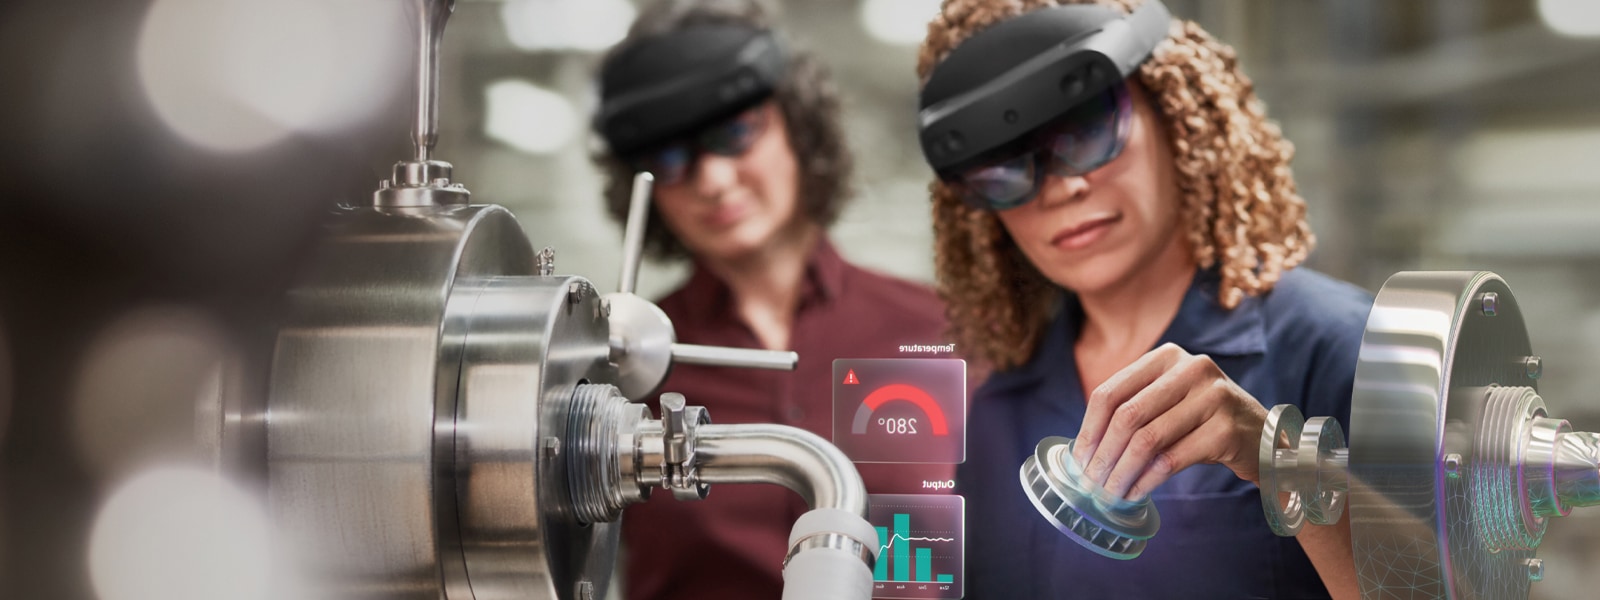 One woman uses a HoloLens device at work, while another female coworker observes.